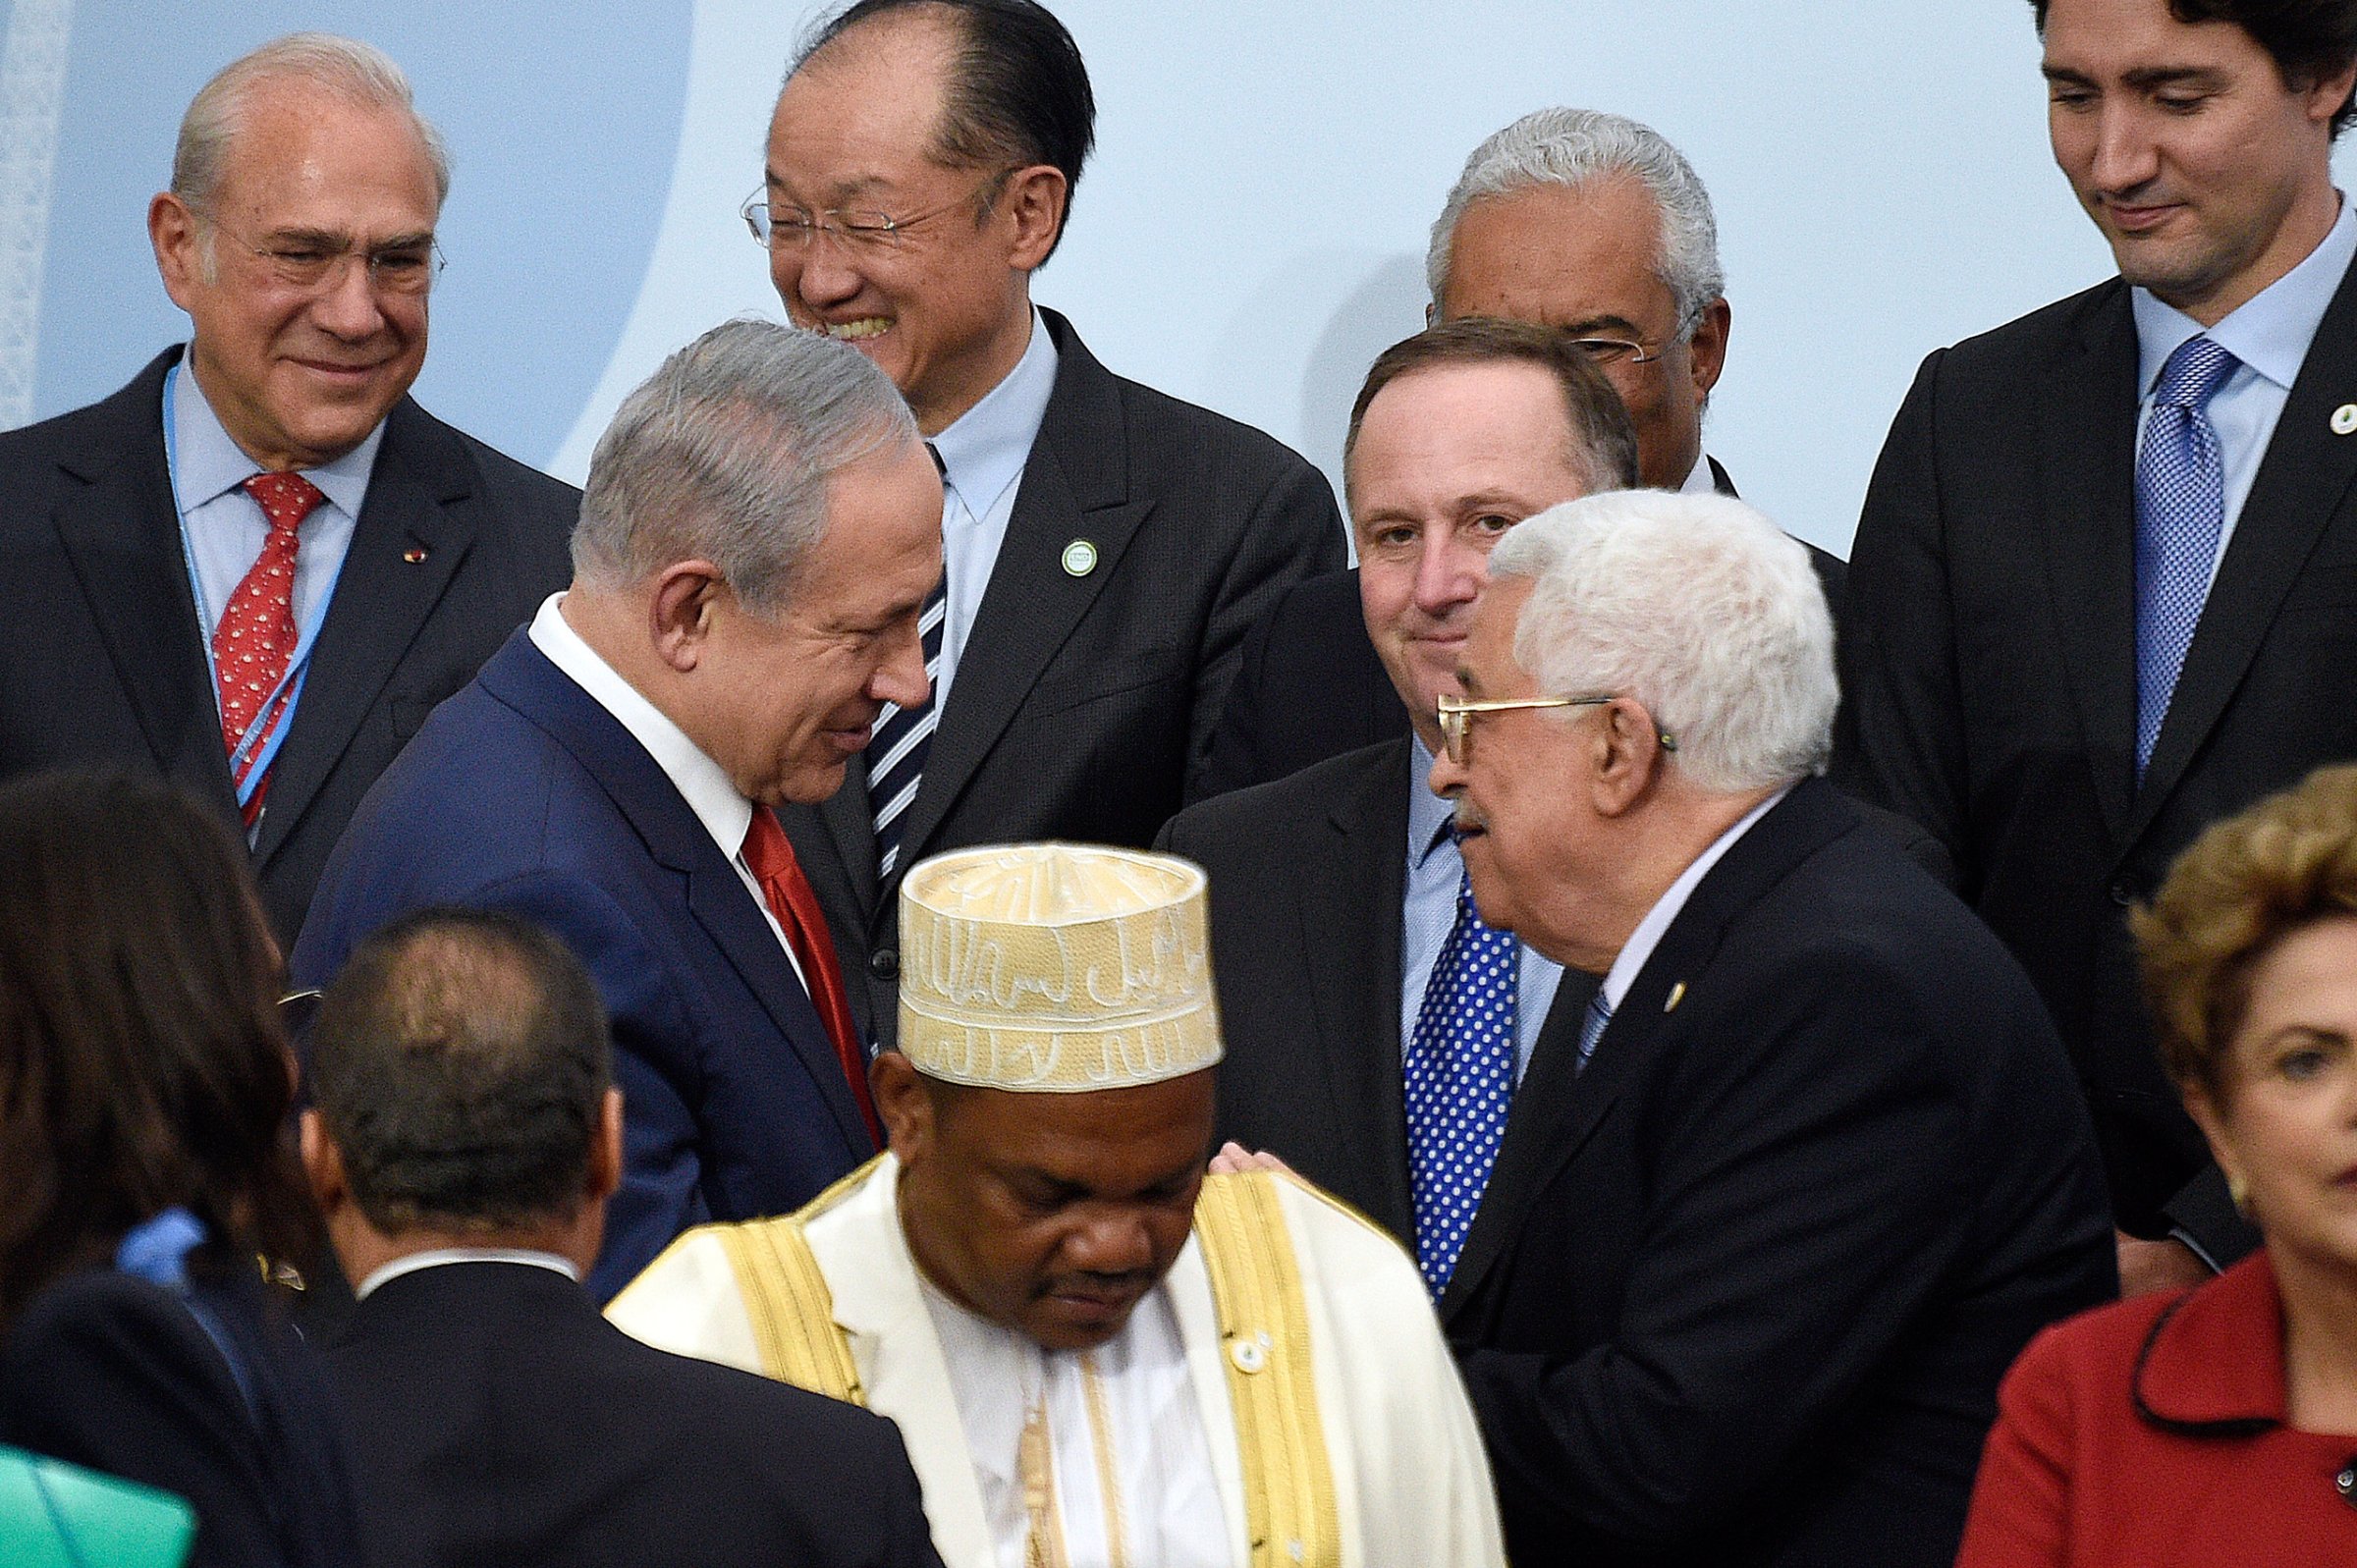 Israeli Prime Minister Benjamin Netanyahu, center left, talks with Palestinian President Mahmoud Abbas, center right, as they wait to pose for a group photo as part of the COP21, the United Nations Climate Change Conference, in Le Bourget, outside Paris, Monday, Nov. 30, 2015. More than 150 world leaders are meeting under heightened security, for the 21st Session of the Conference of the Parties to the United Nations Framework Convention on Climate Change (COP21/CMP11), also known as "Paris 2015" from November 30 to December 11. (Martin Bureau/Pool Photo via AP)